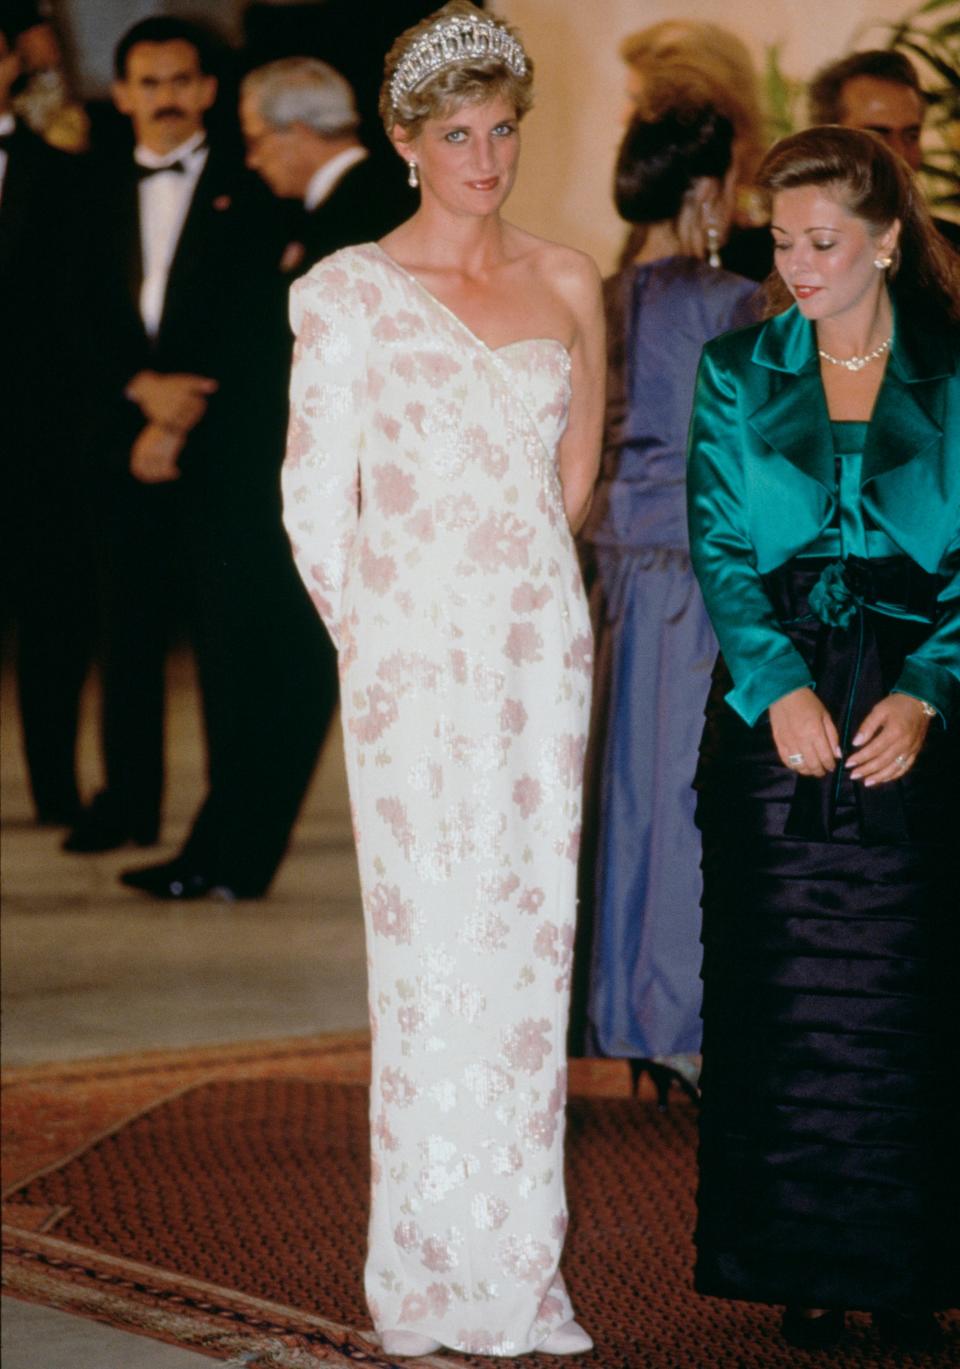 31 of the most daring outfits royals have ever worn